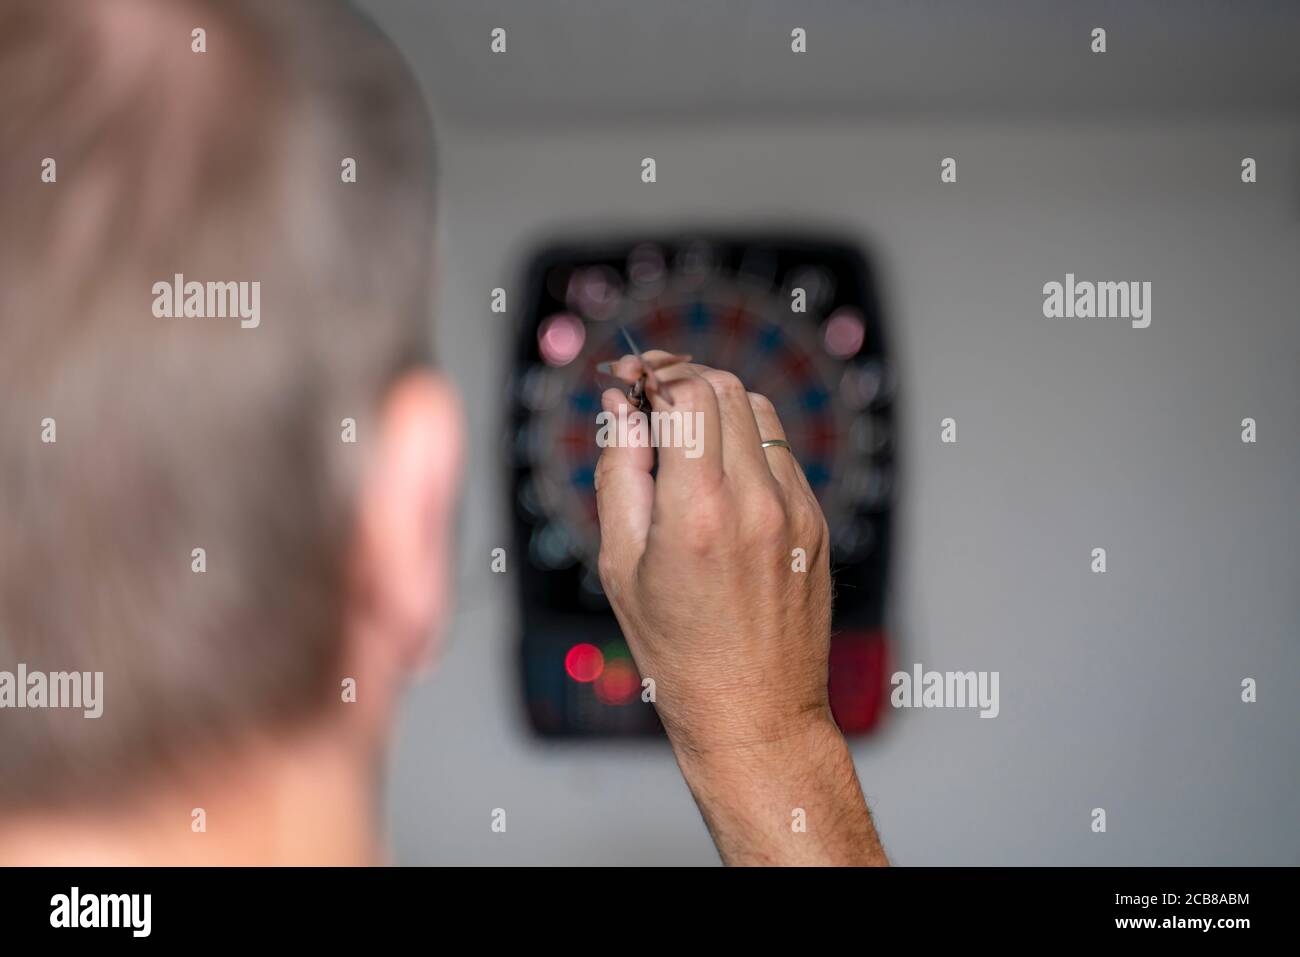 A 50 year old blond man plays darts. An electric dart machine shows his hits in a duel. The dartboard is hanging in a party cellar. Stock Photo